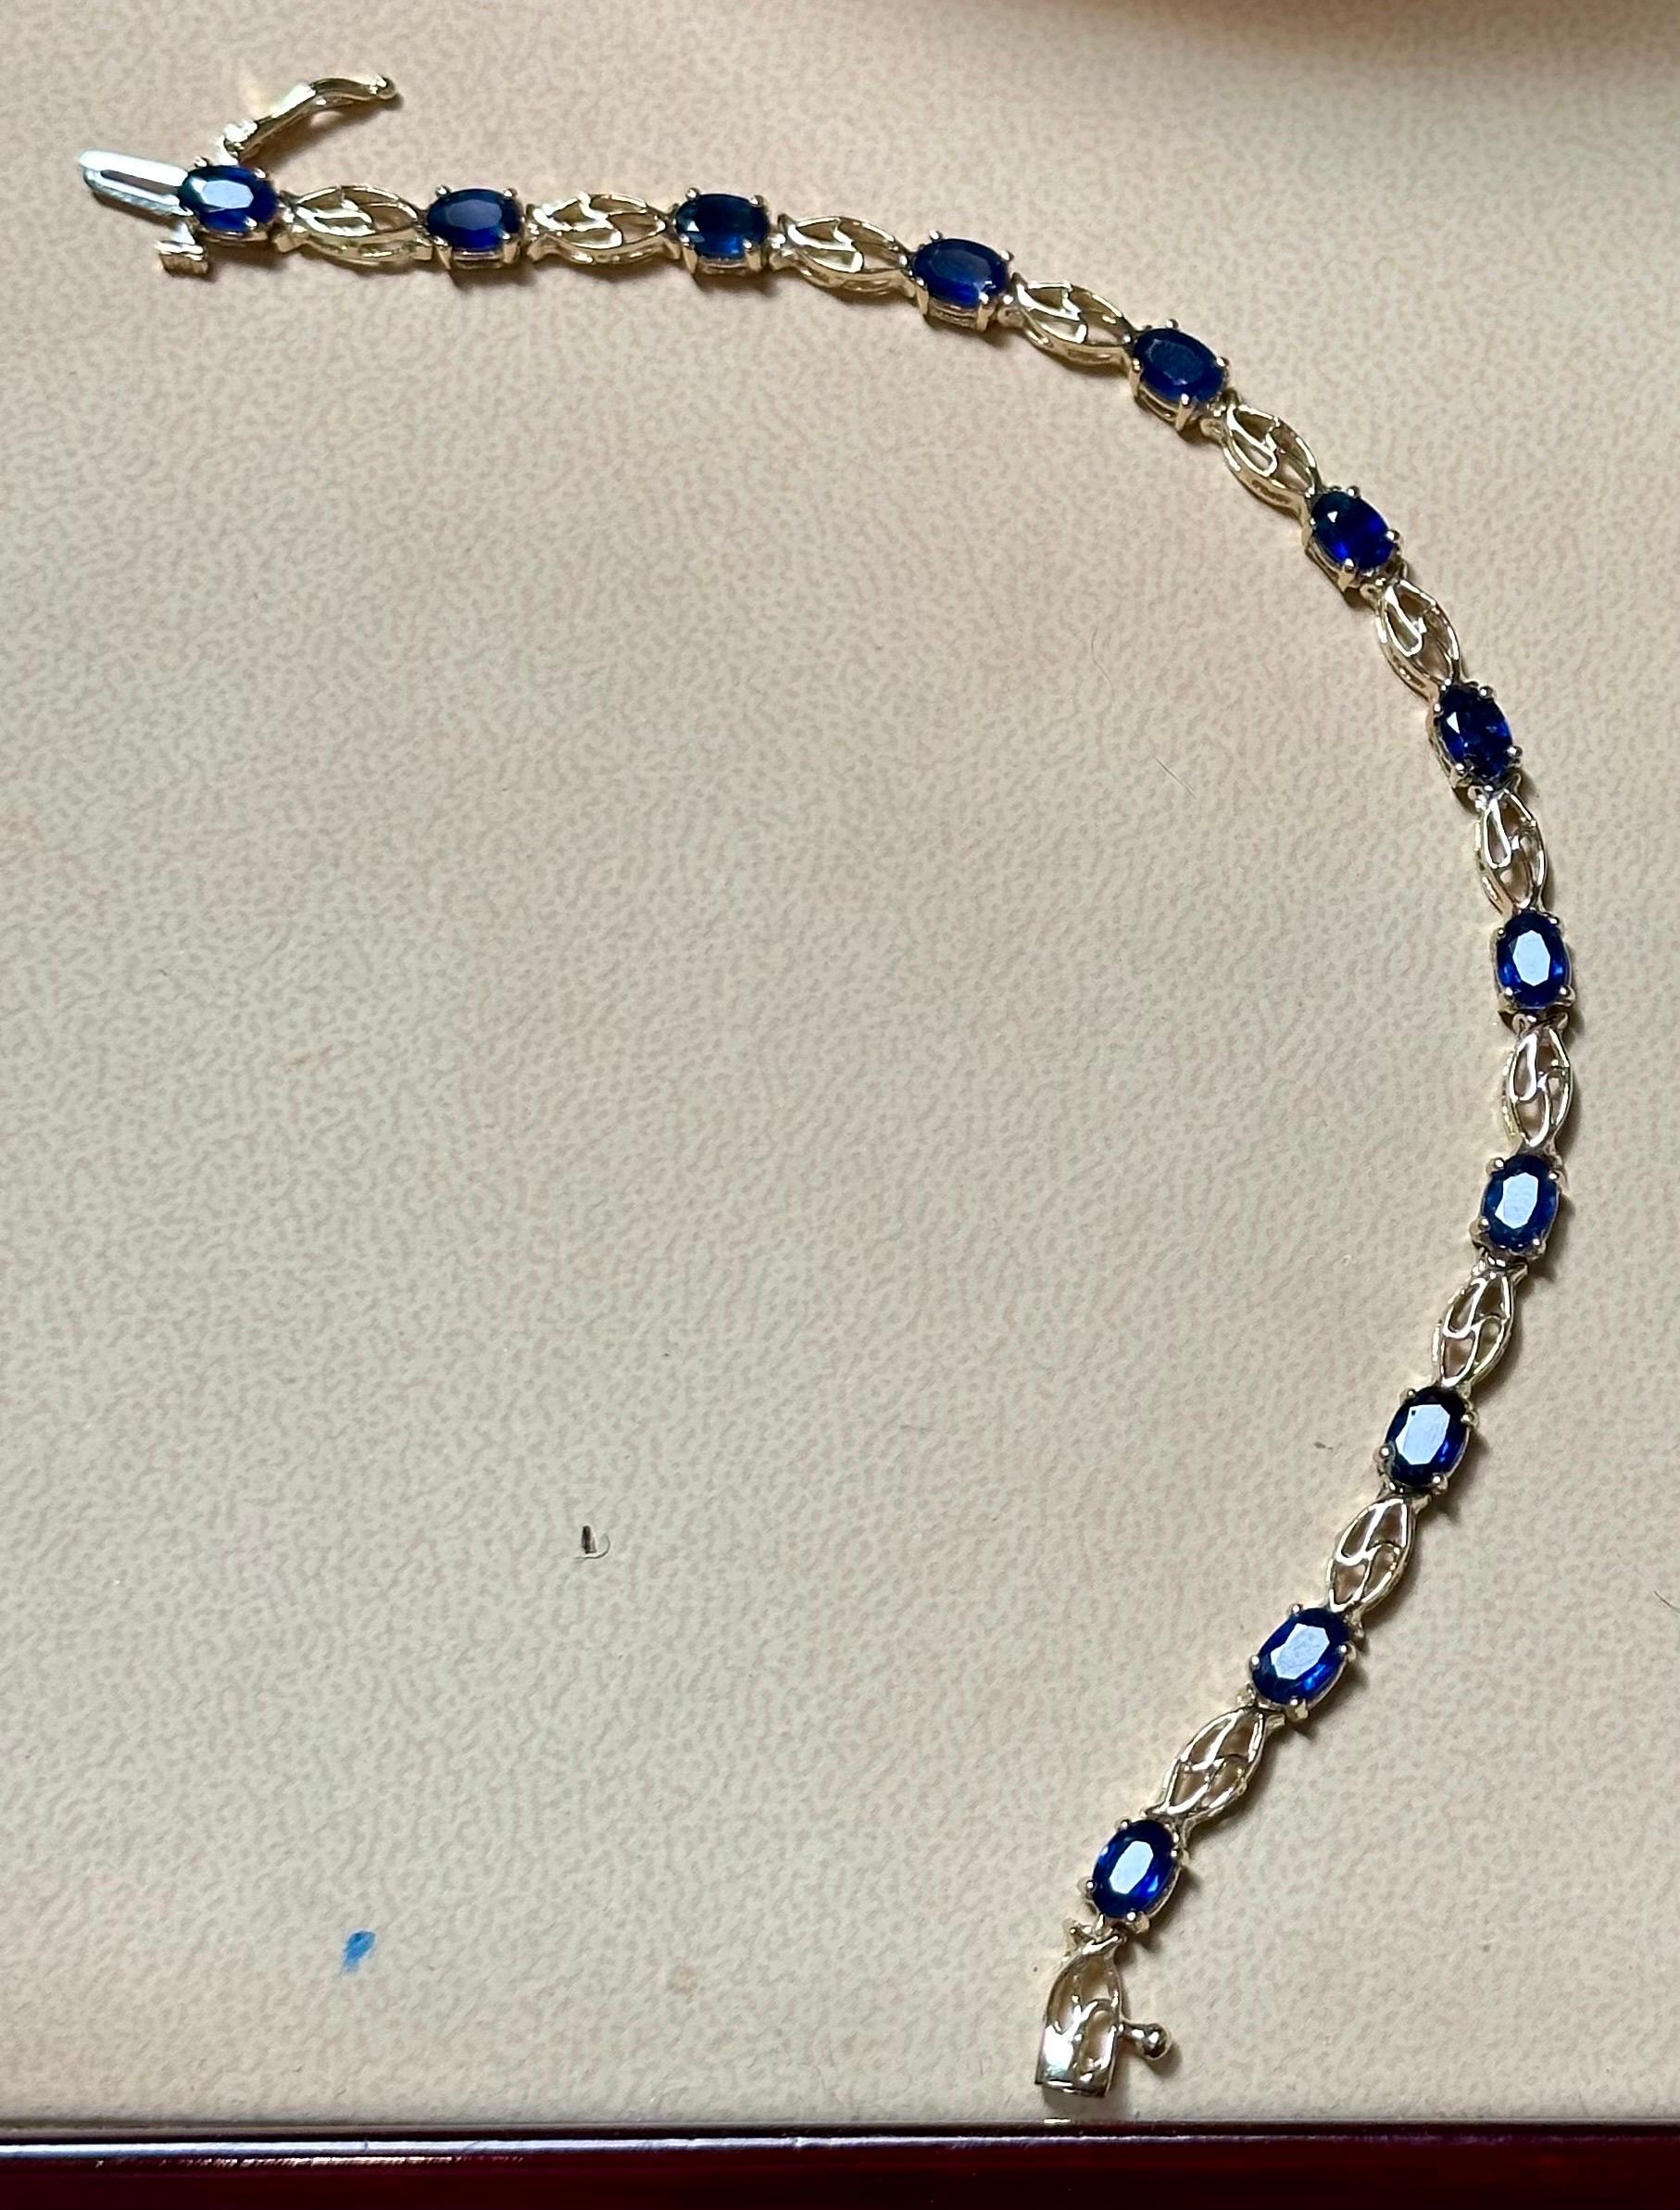  Natural Oval  Blue Sapphire  Tennis Bracelet 14 Karat White Gold, 7 Inch Long
This exceptionally affordable Tennis  bracelet has  12 Oval  stones of sapphire set in a 14 Karat white gold
Total weight of Sapphire is approximately 8 carat. 
The